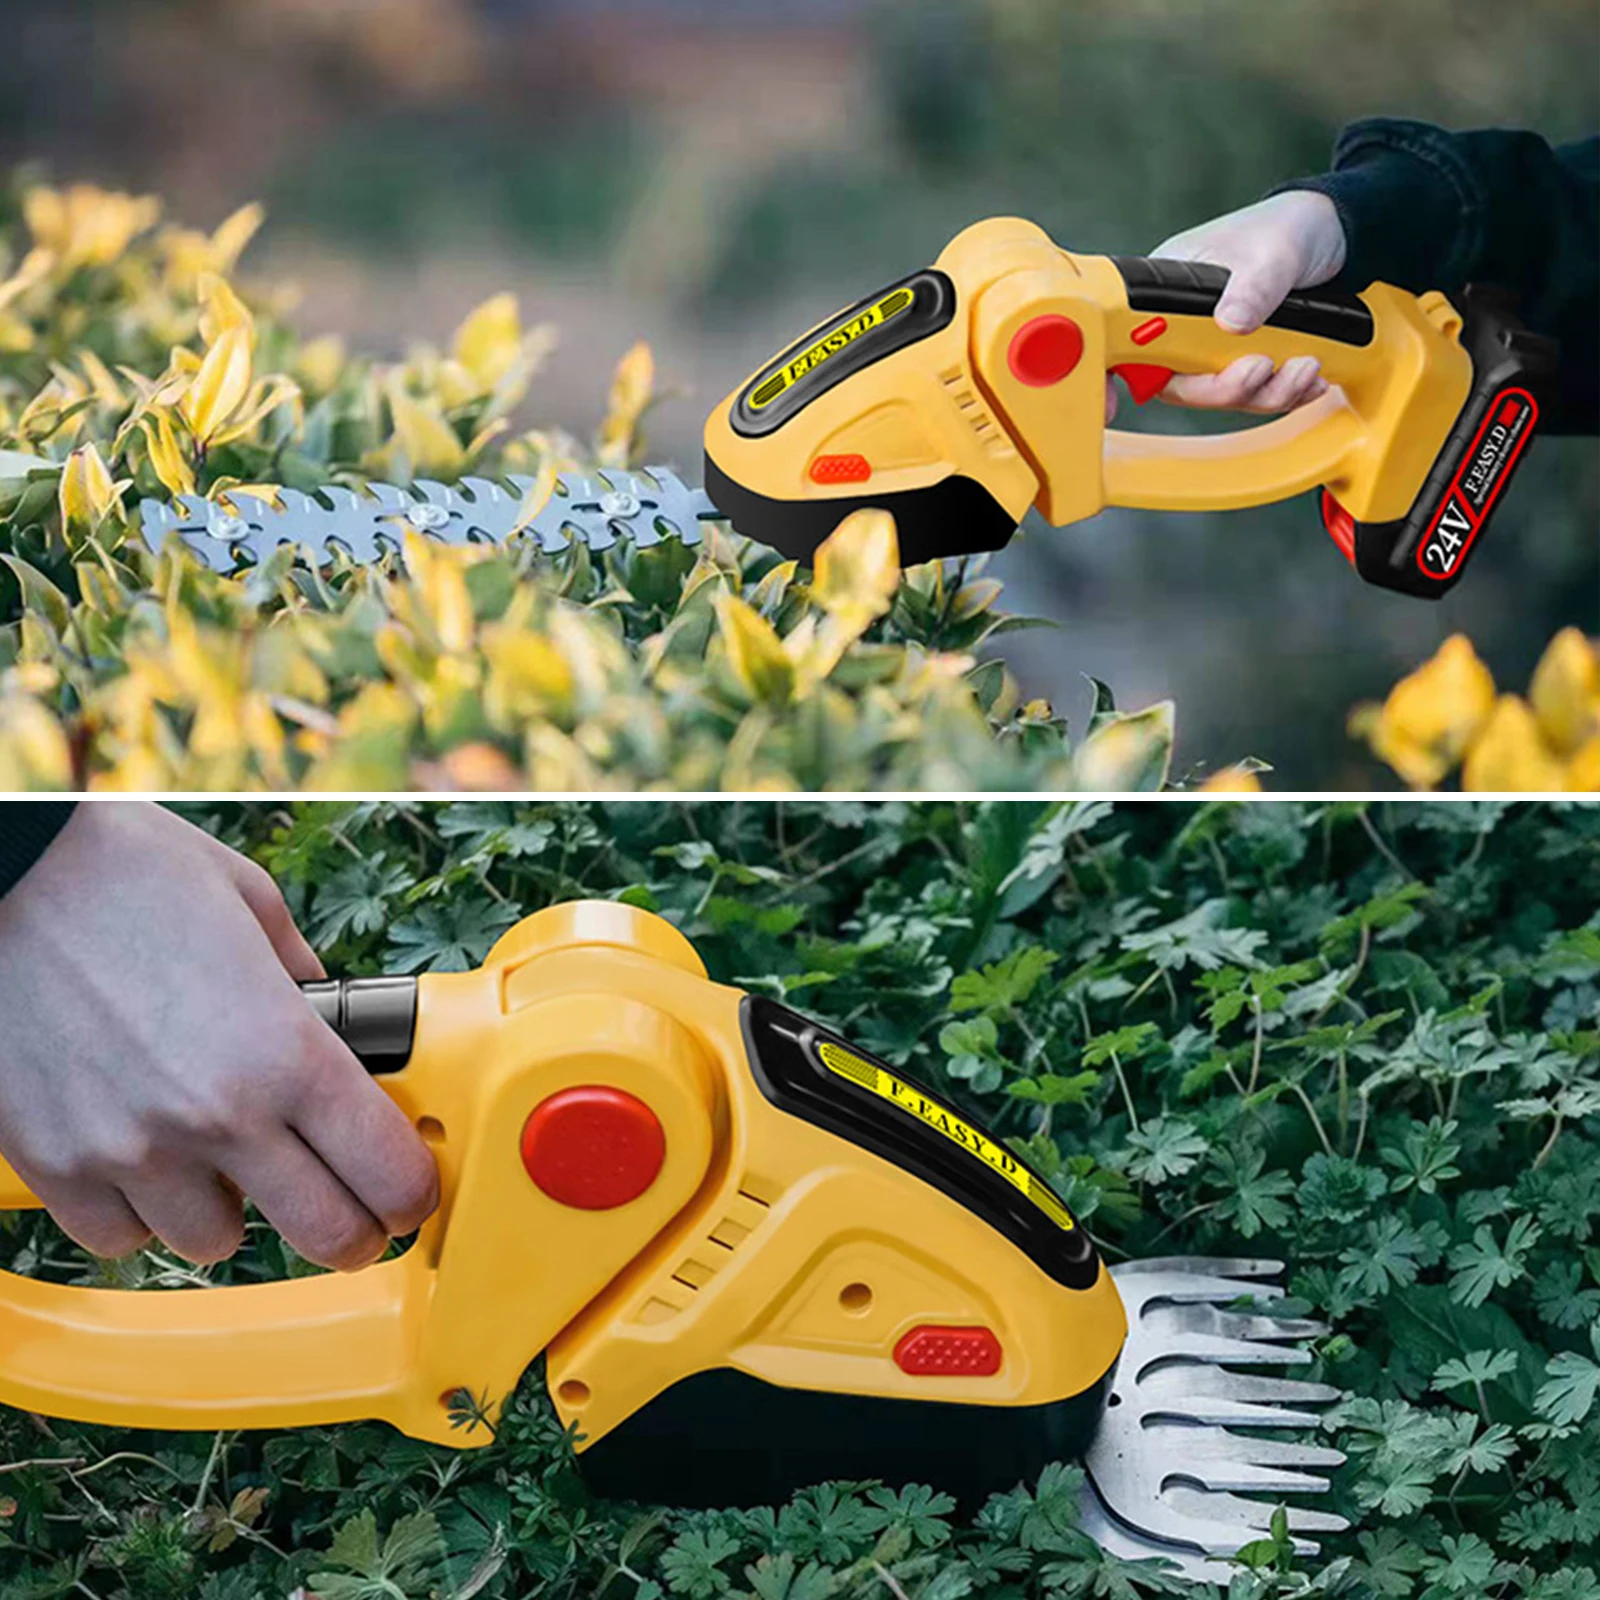 

24V Cordless Electric Hedge Trimmer Household Lawn Mower Rechargeable Pruning Shear Mower Garden Grass Scissors Tools